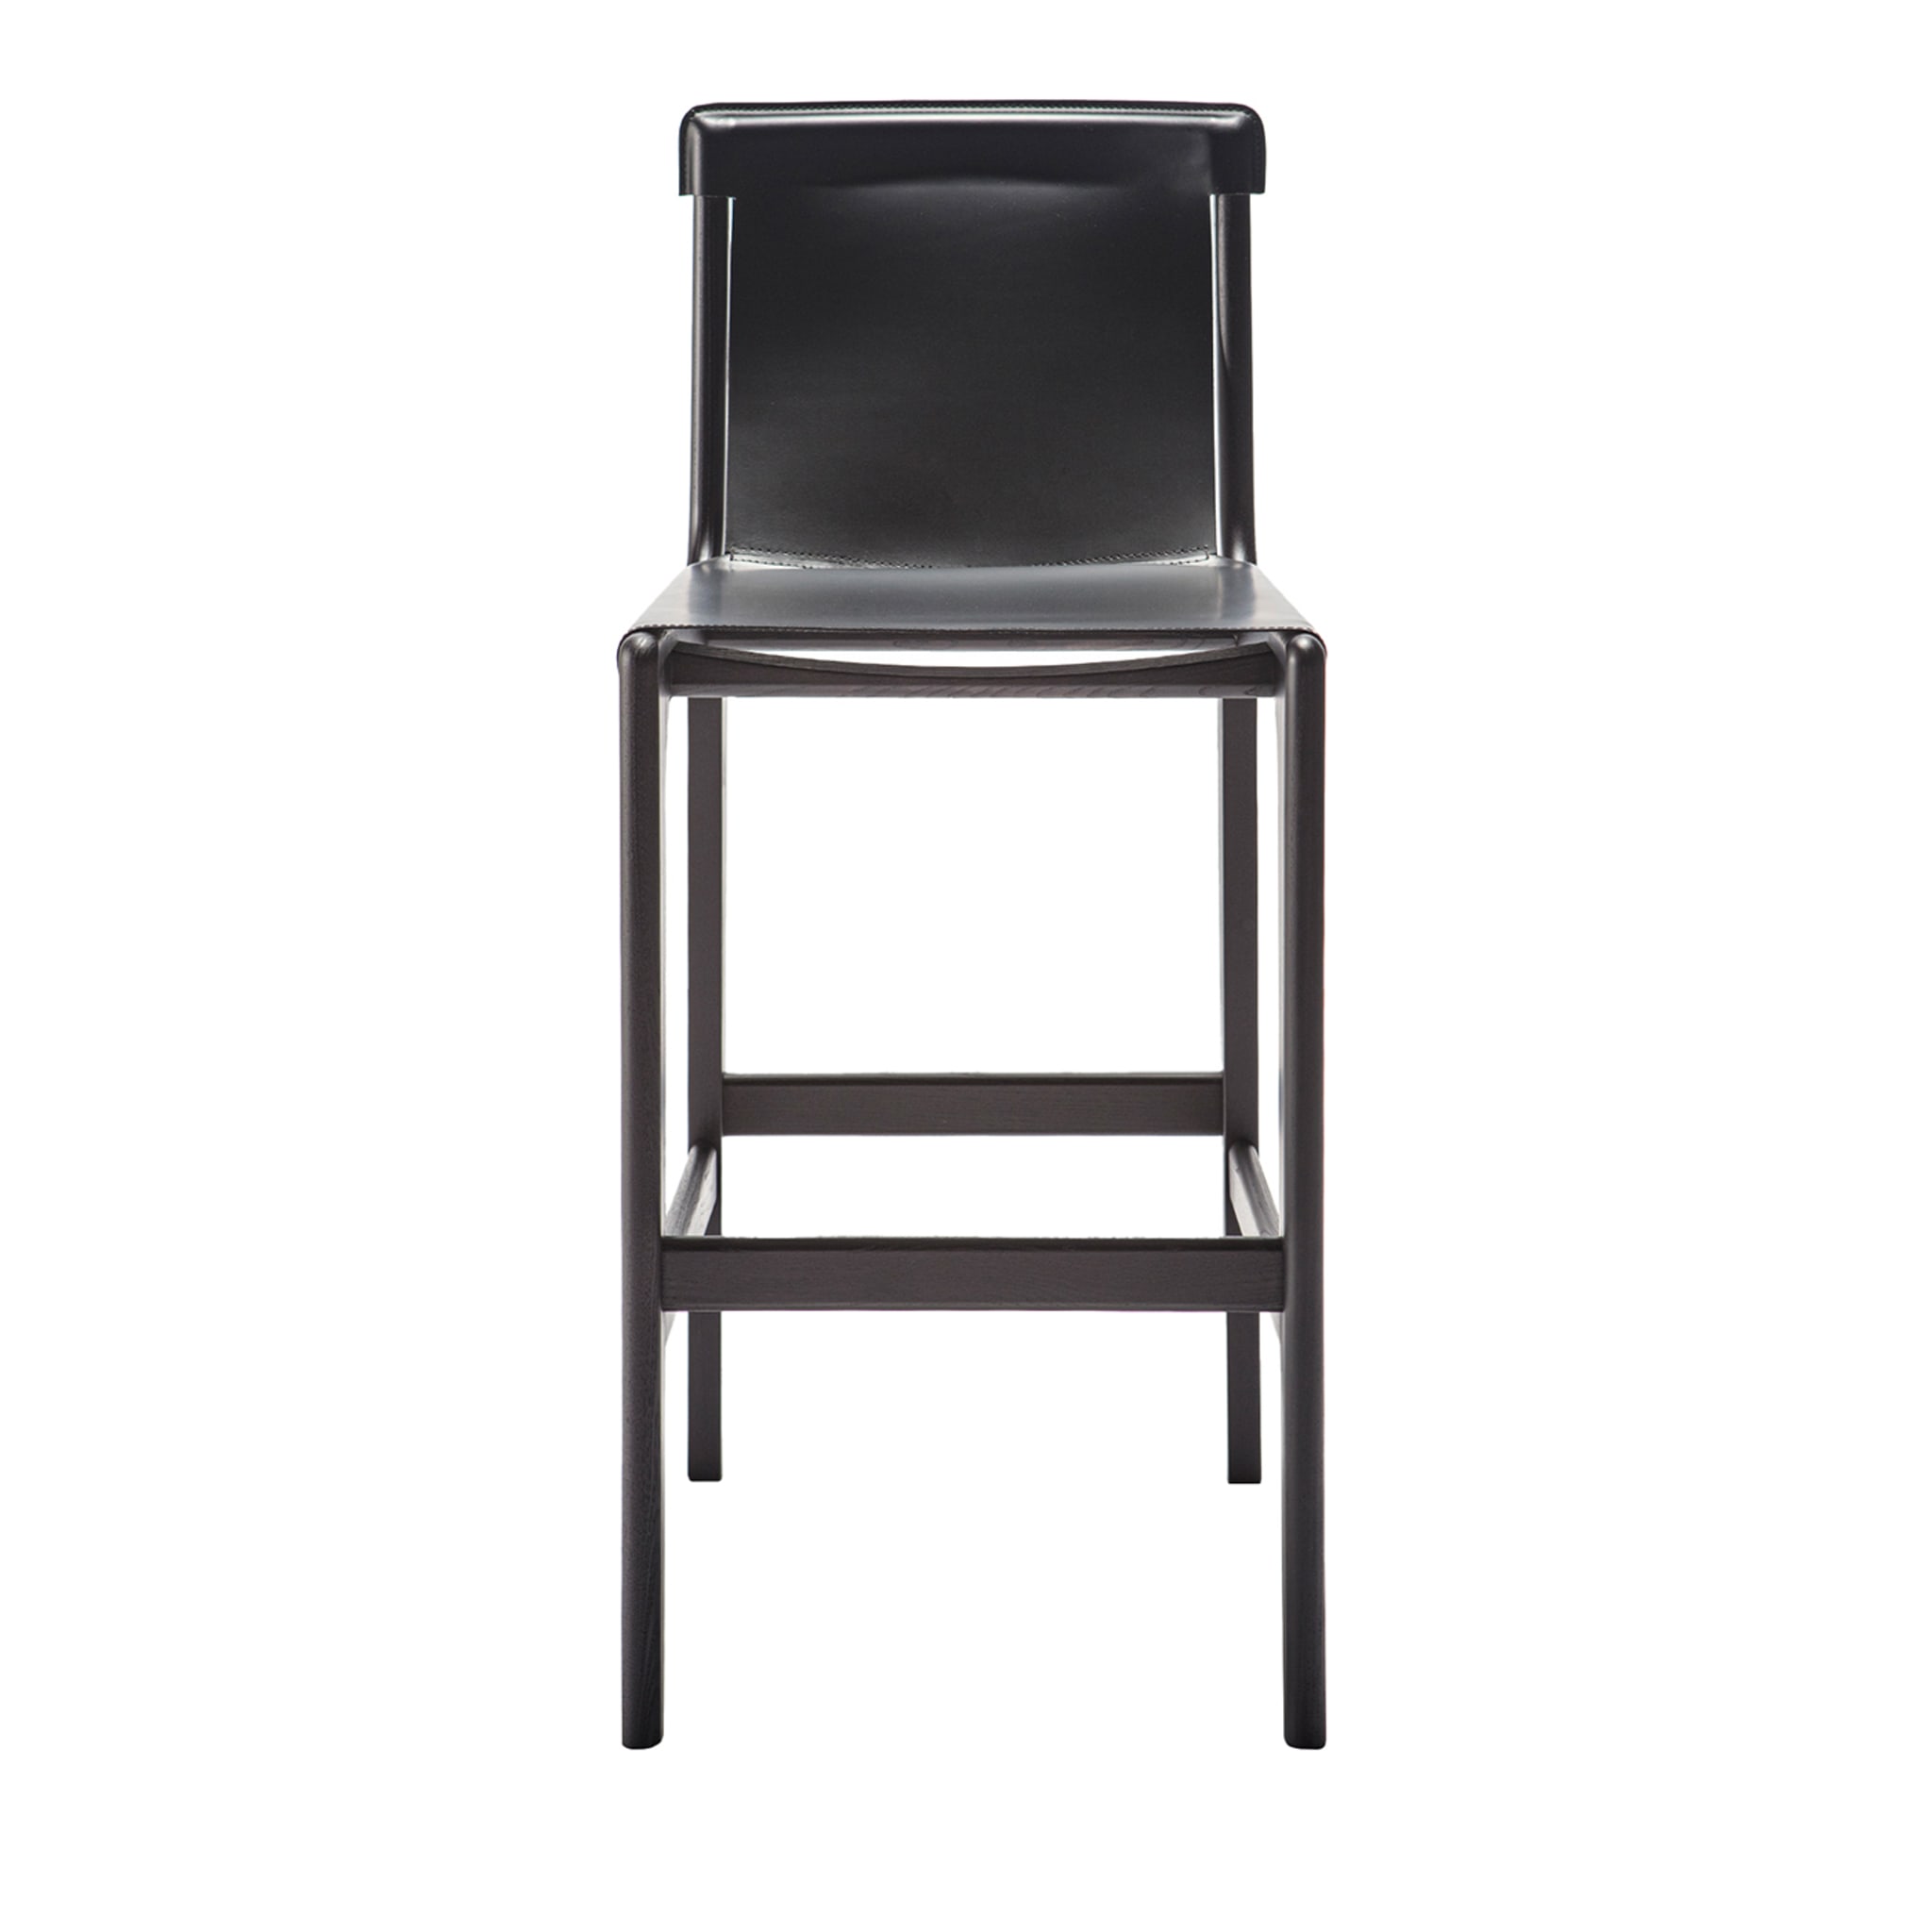 Burano/sg 30 Black Leather Counter Stool by Balutto Associati - Main view